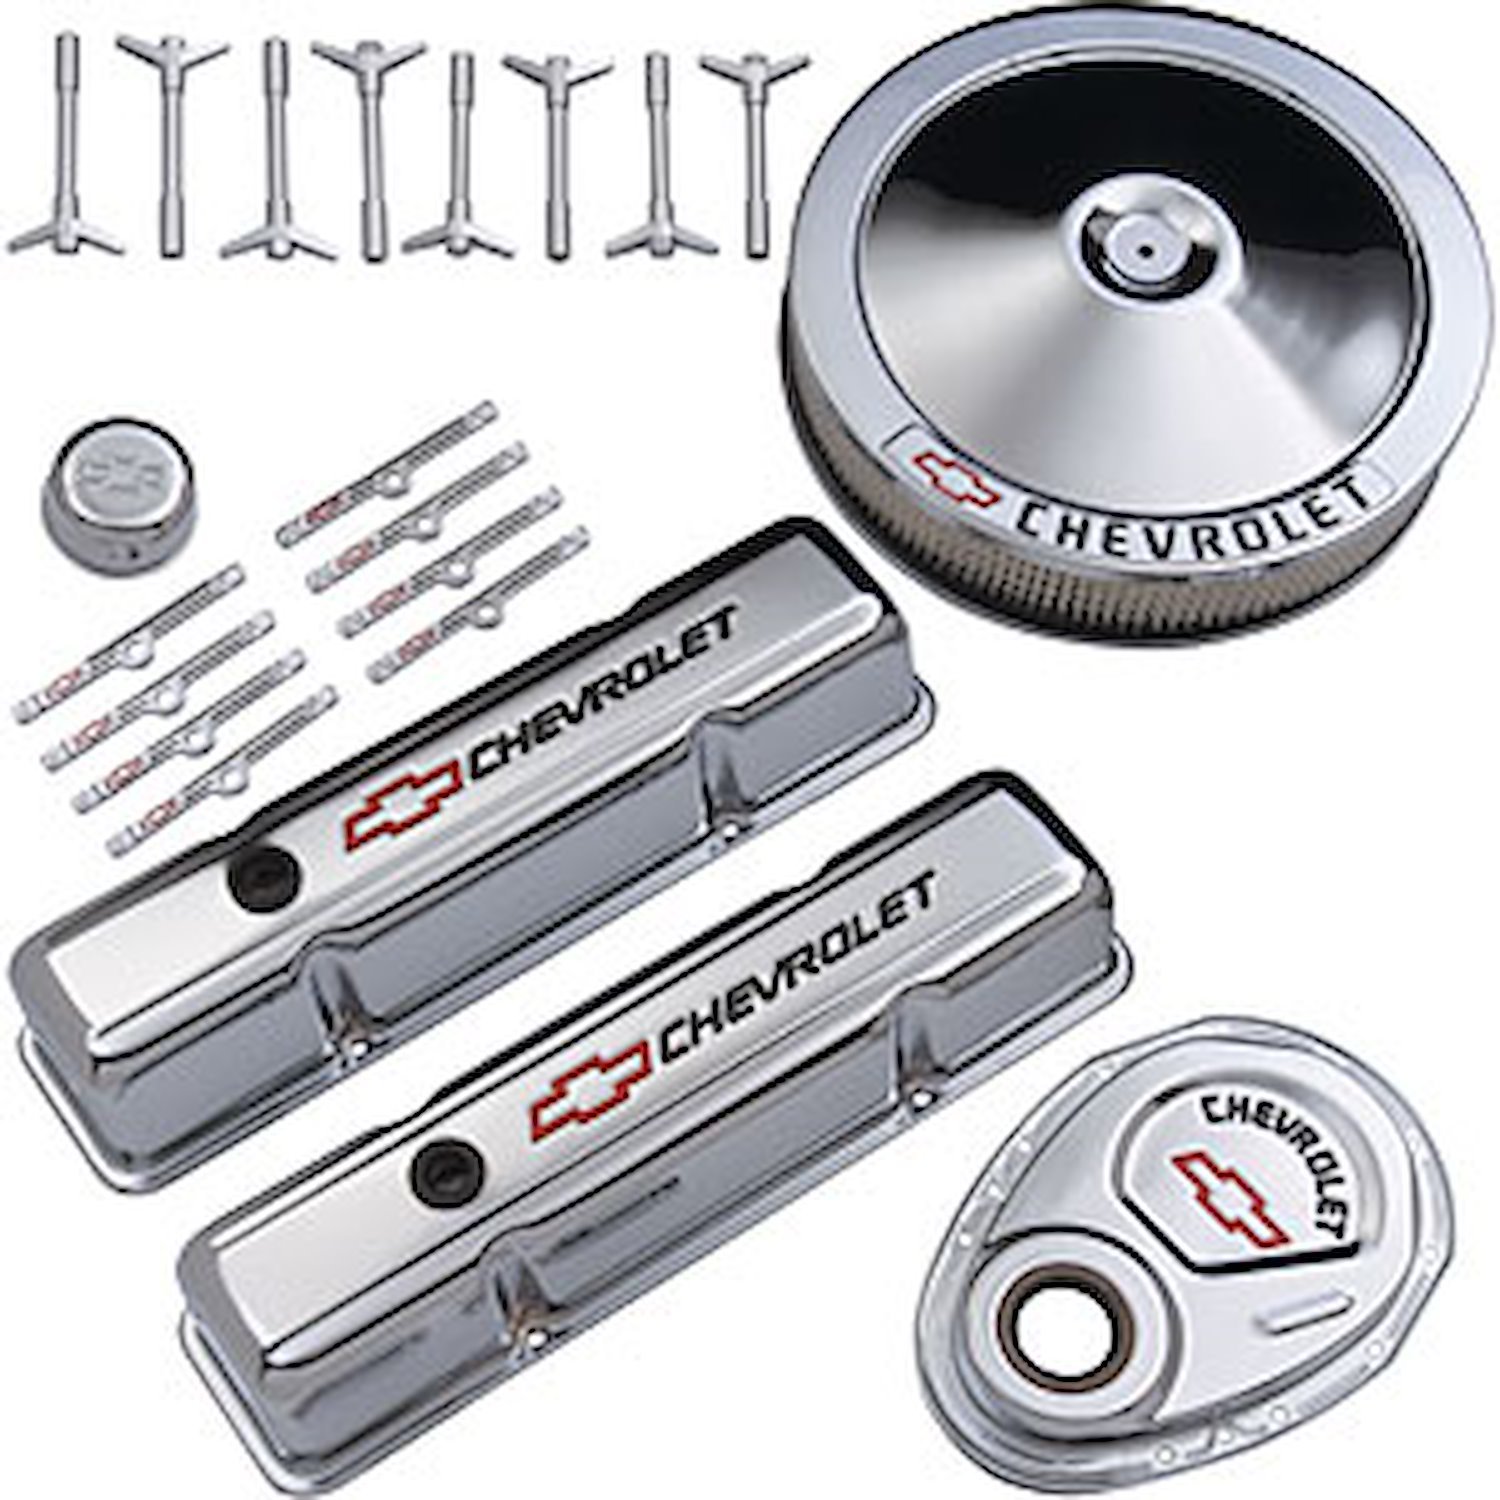 Proform Chrome Engine Dress-up Kit for 1958-1986 Small Block Chevy with  Chevrolet and Bowtie Emblems